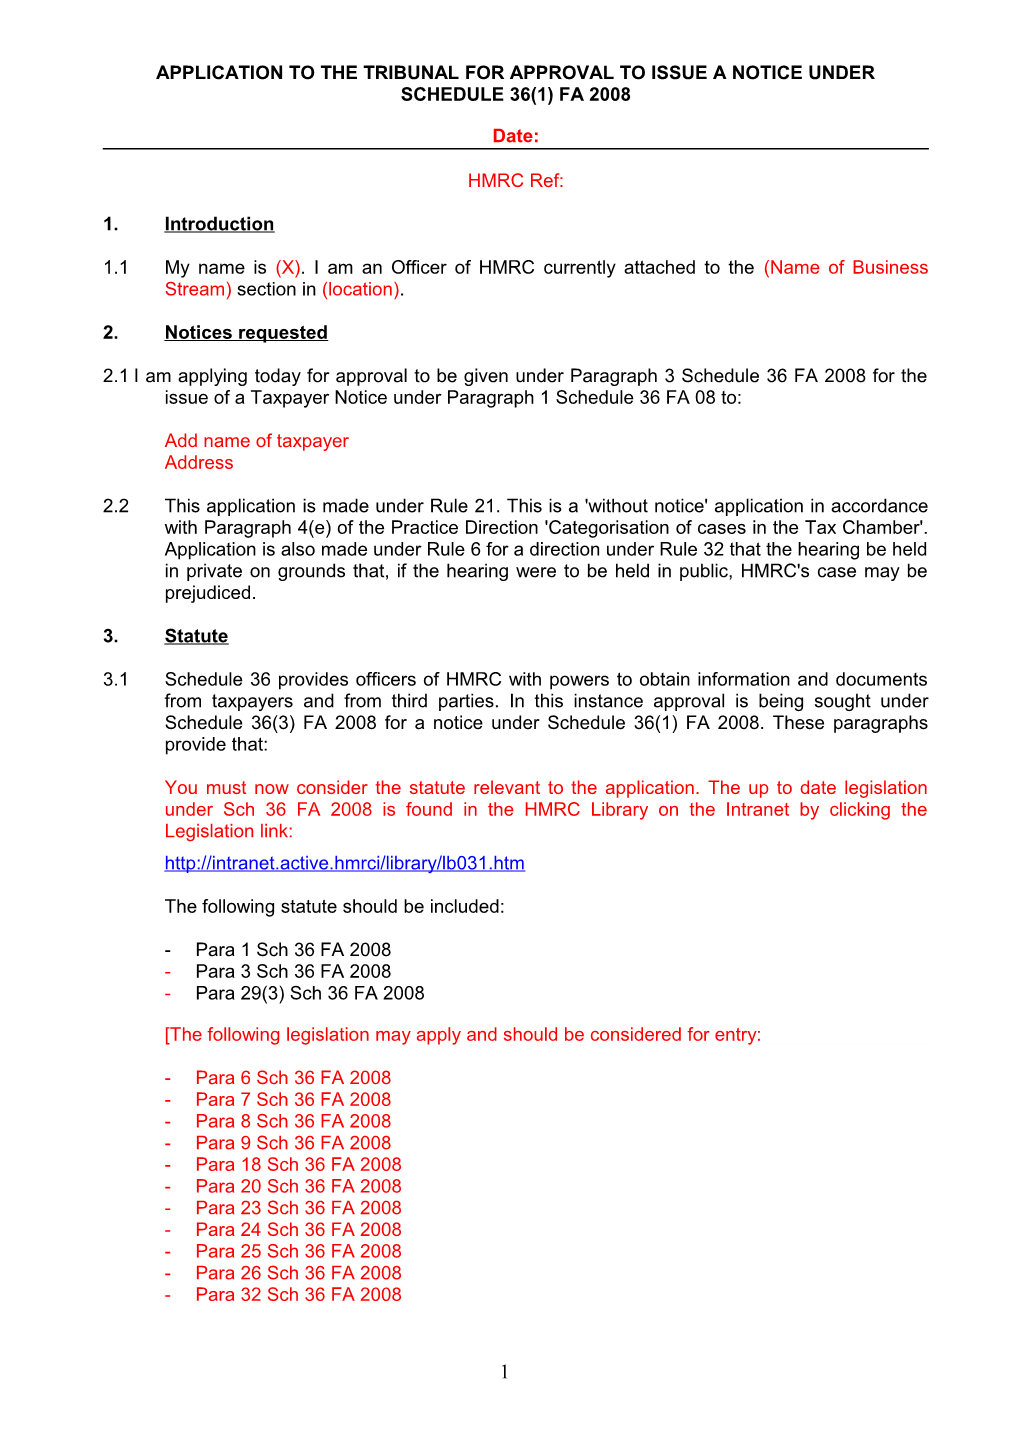 Application to the Tribunal for Approval to Issue a Notice Under Schedule 36(1) Fa 2008